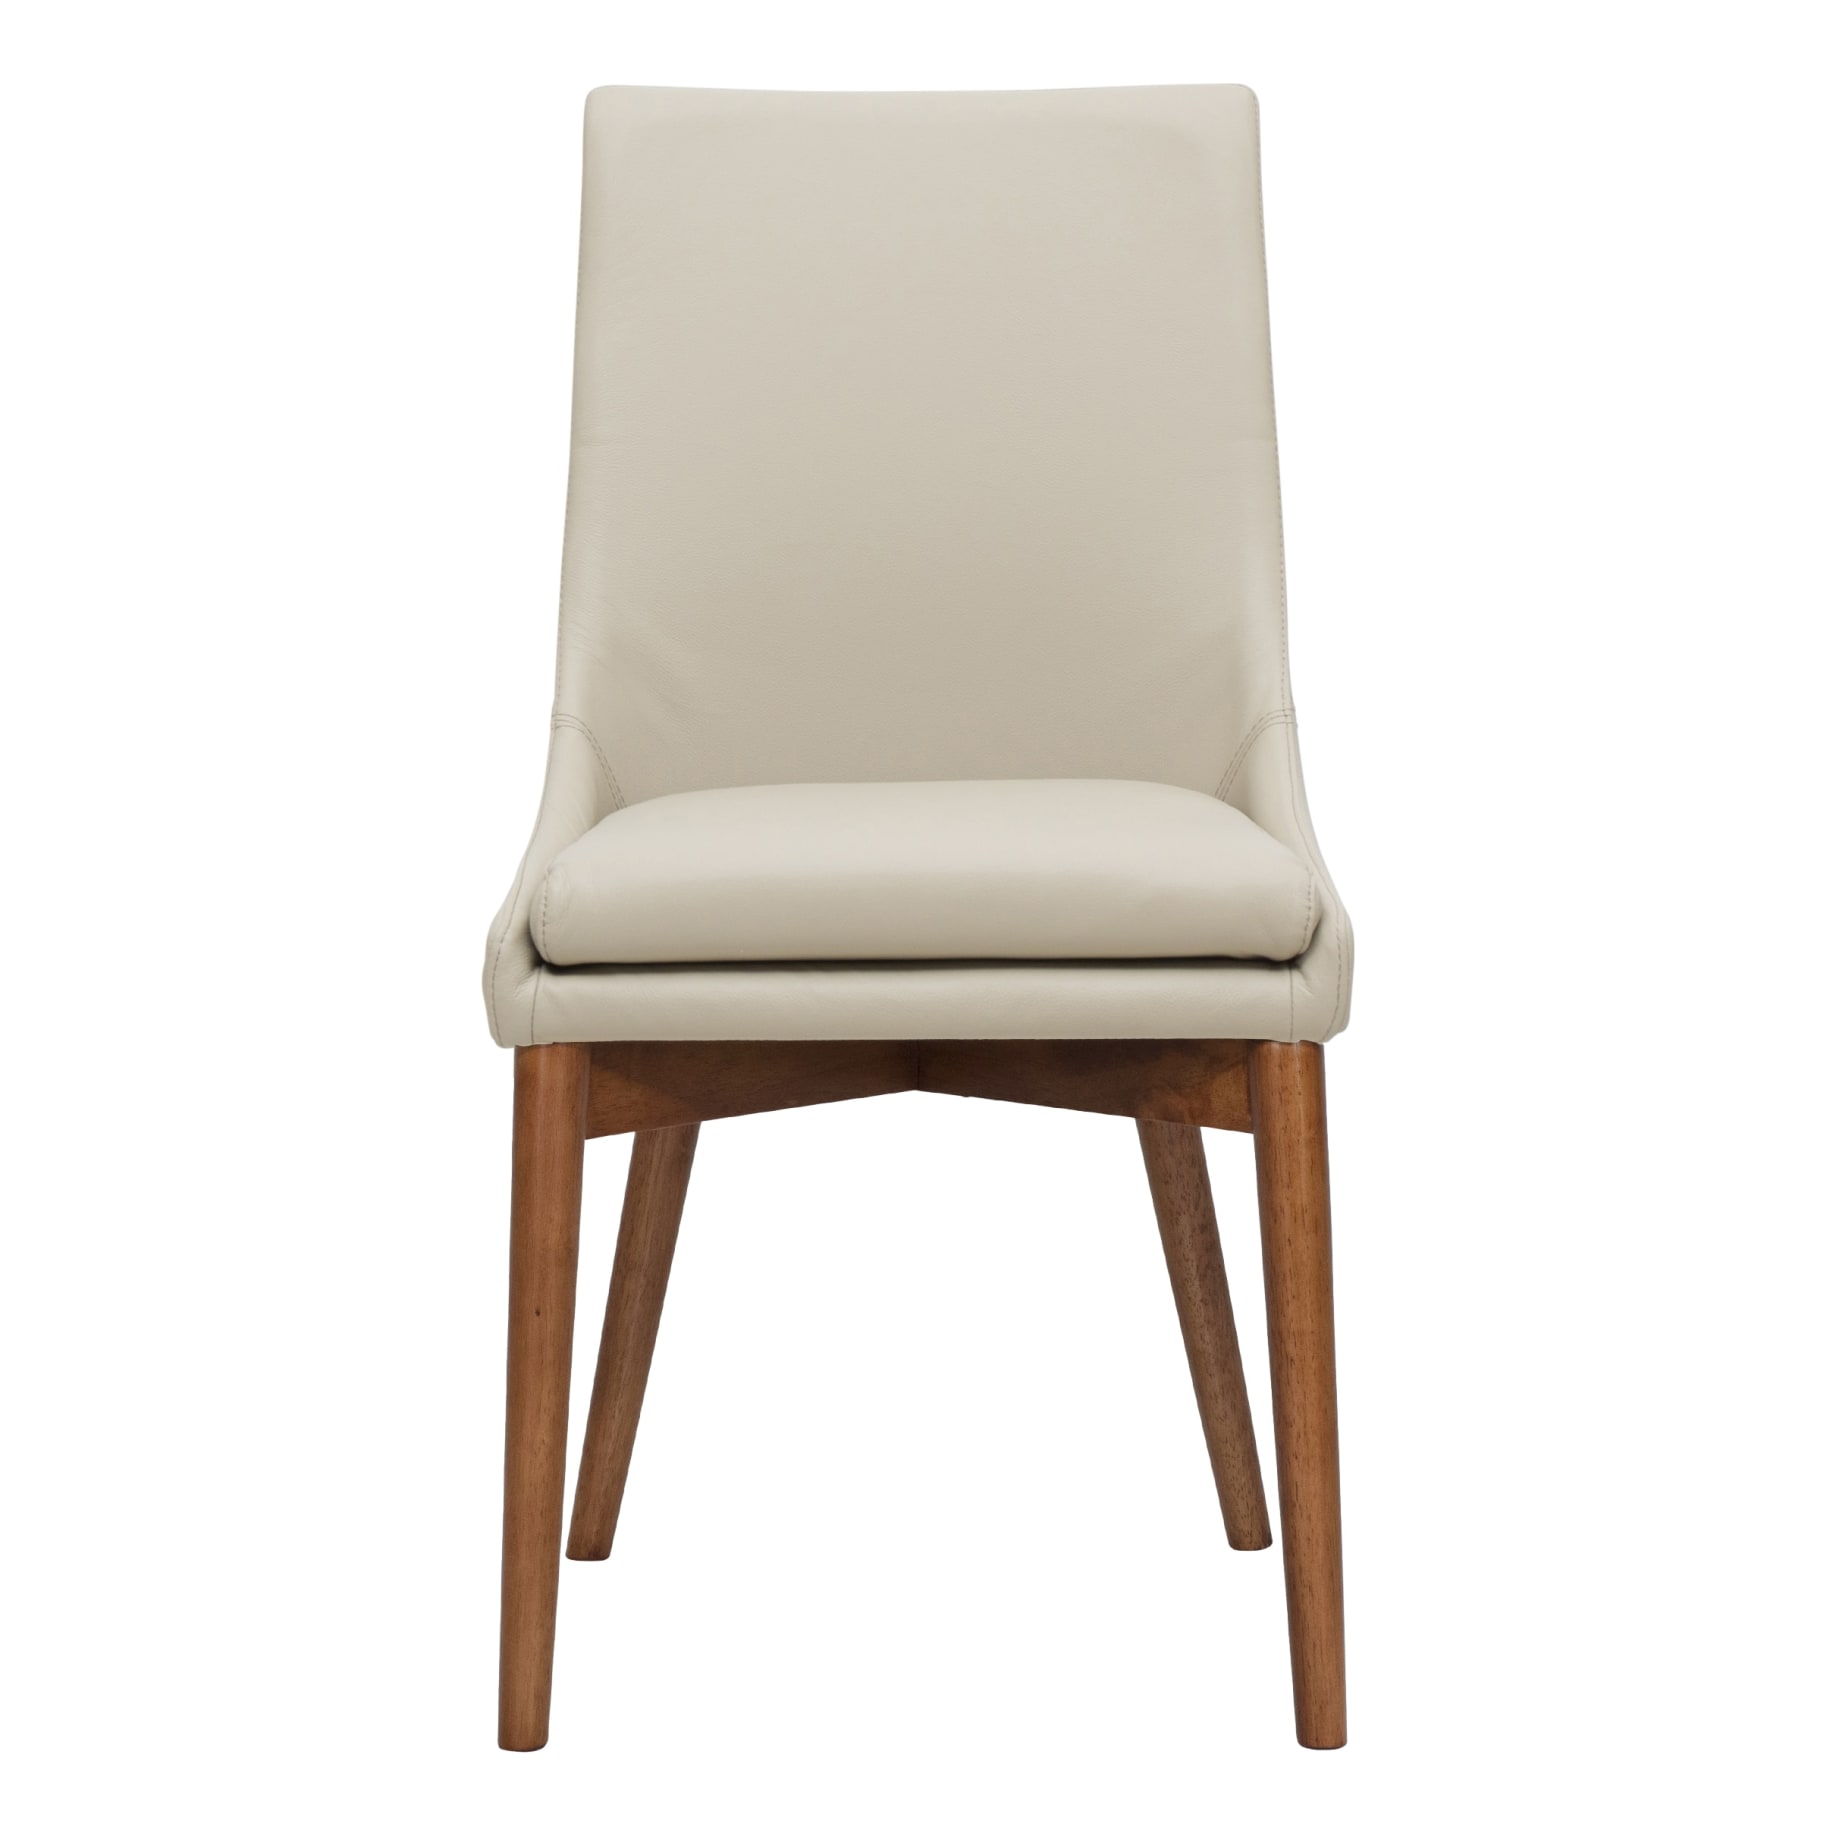 Highland Dining Chair in  Mocha / Blackwood Stain